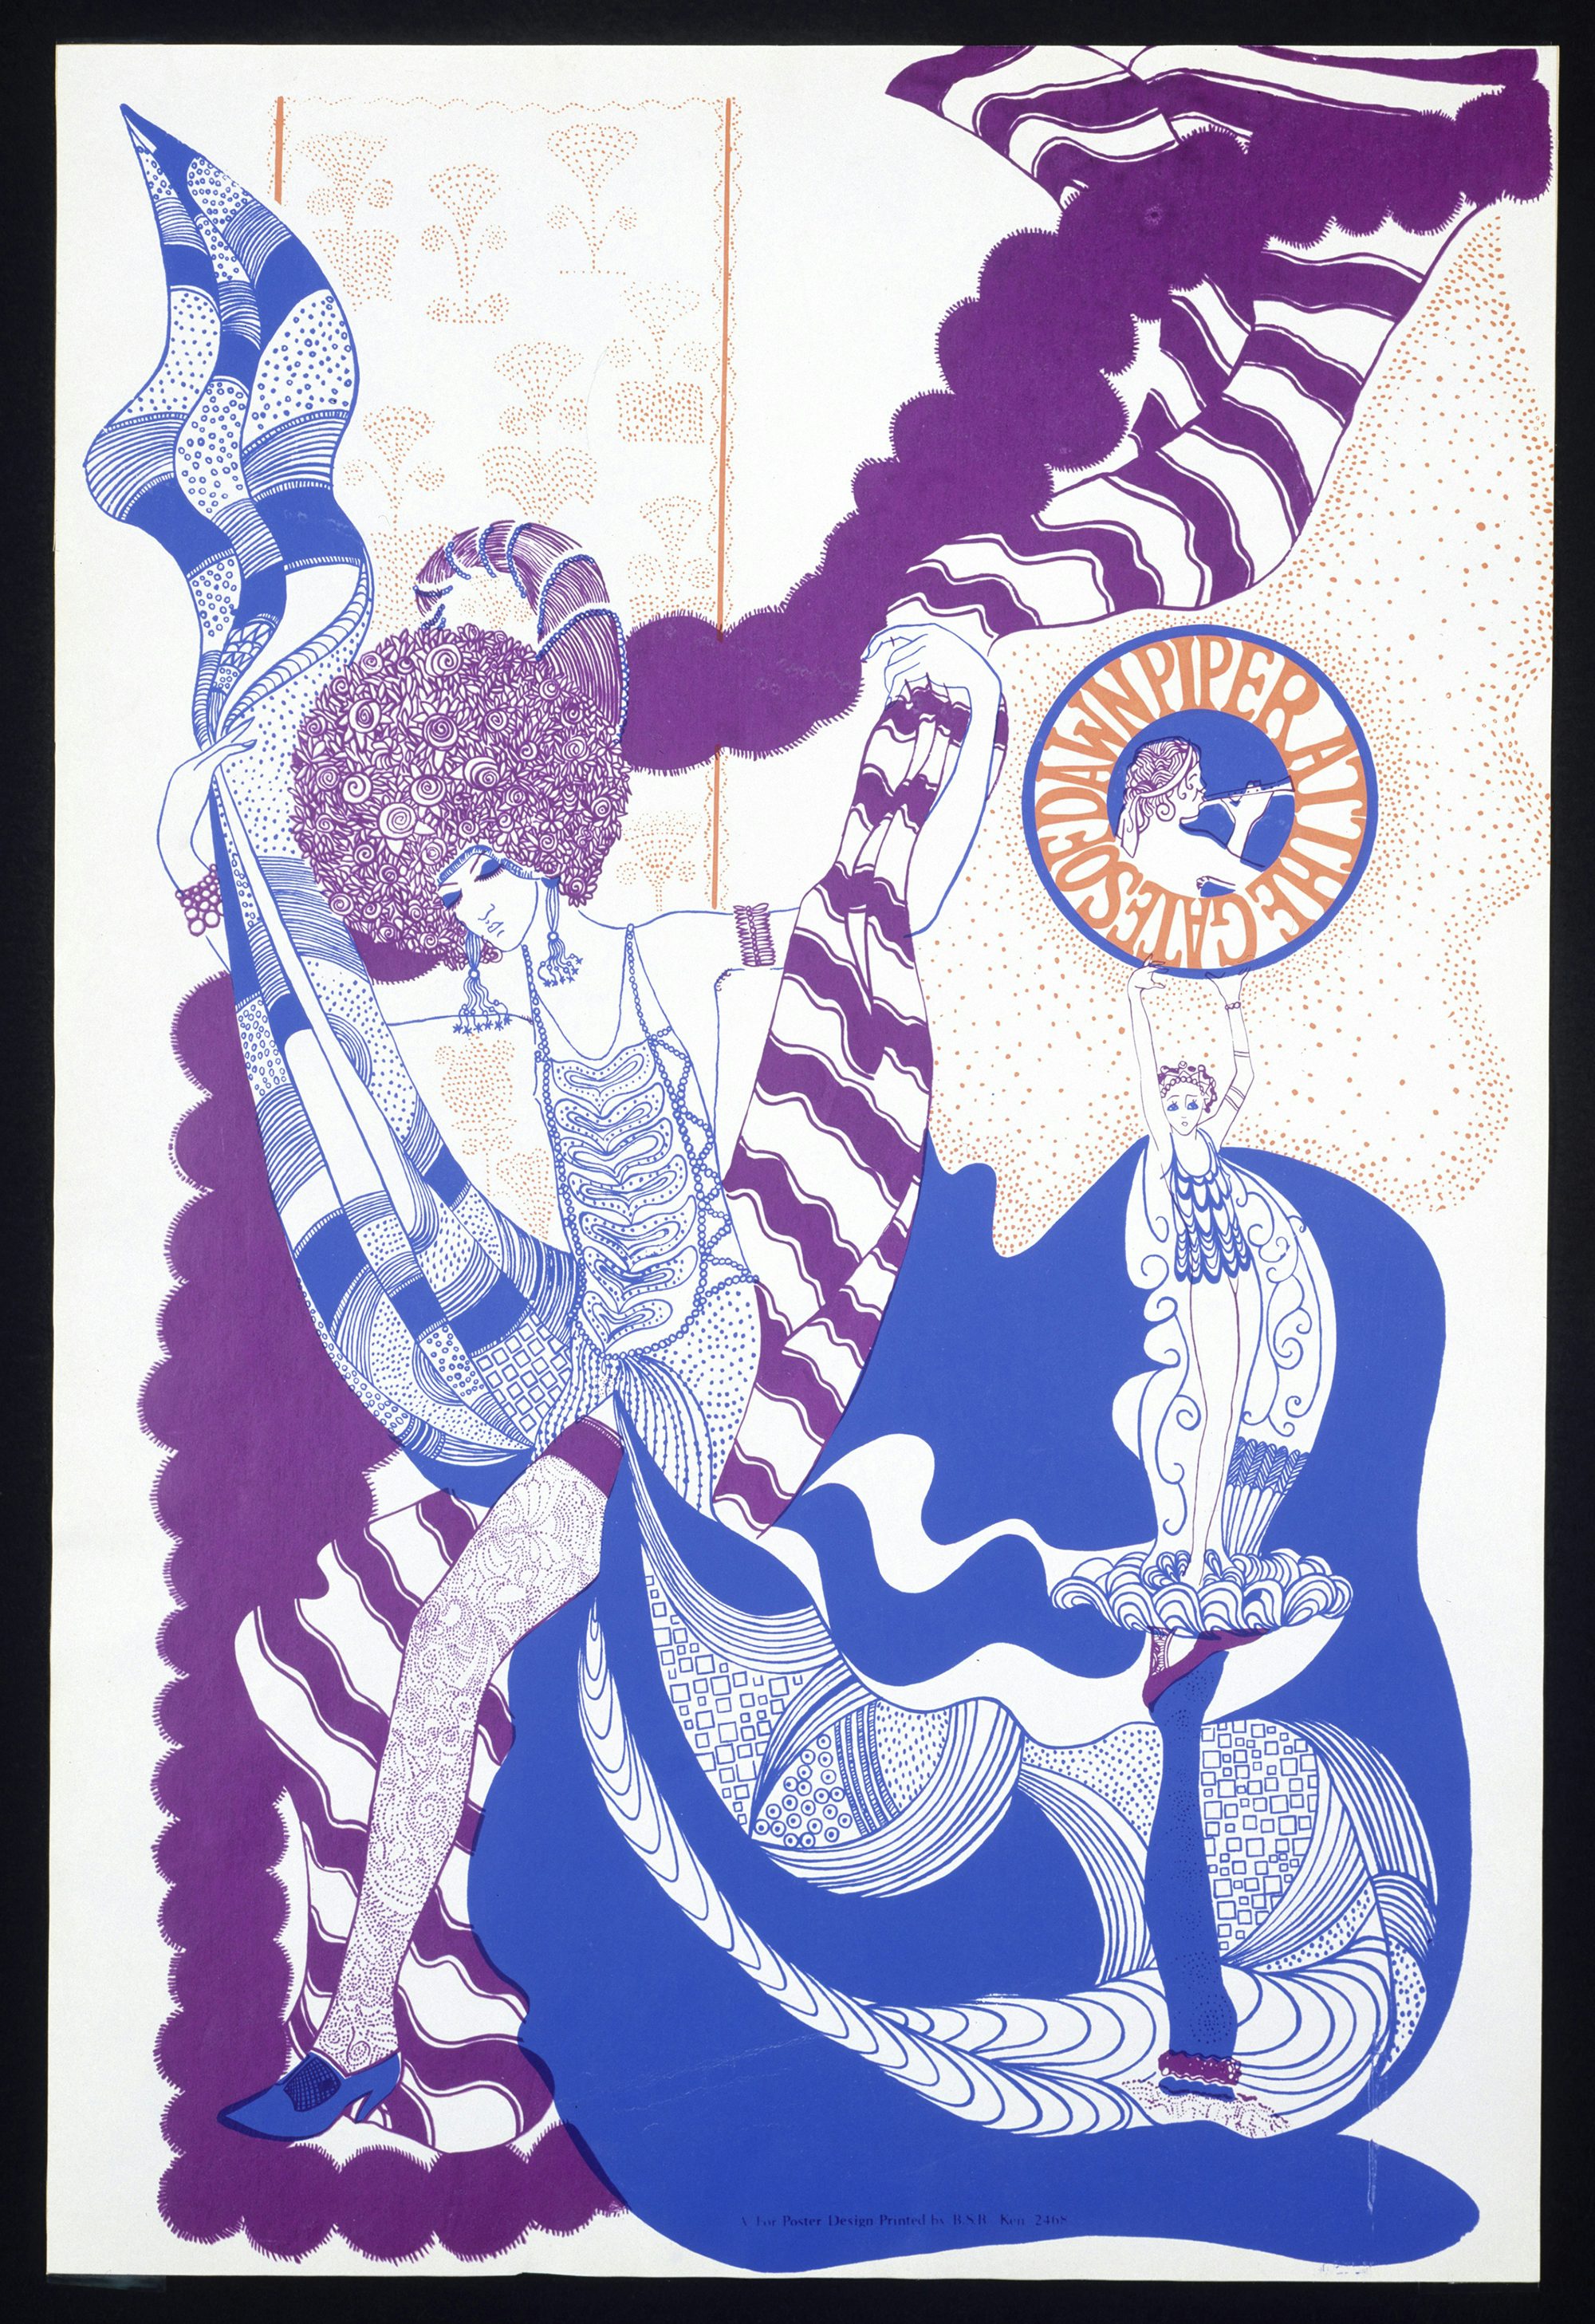 Poster promoting The Piper at the Gates of Dawn in 1967, artist unknown © Victoria and Albert Museum, London